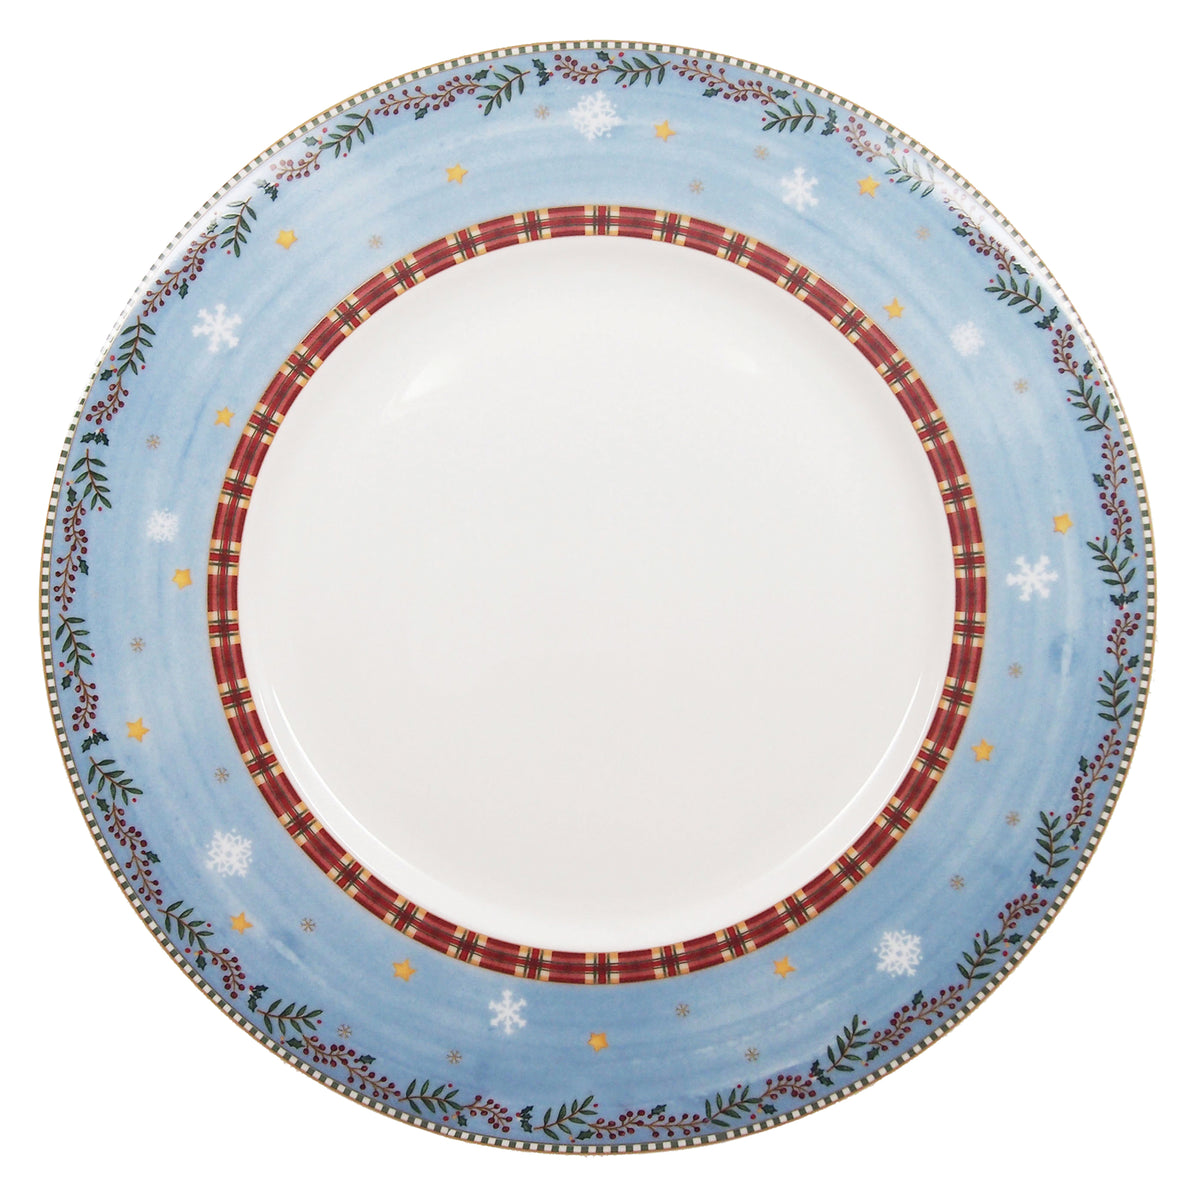 Nutcracker - Charger Plate